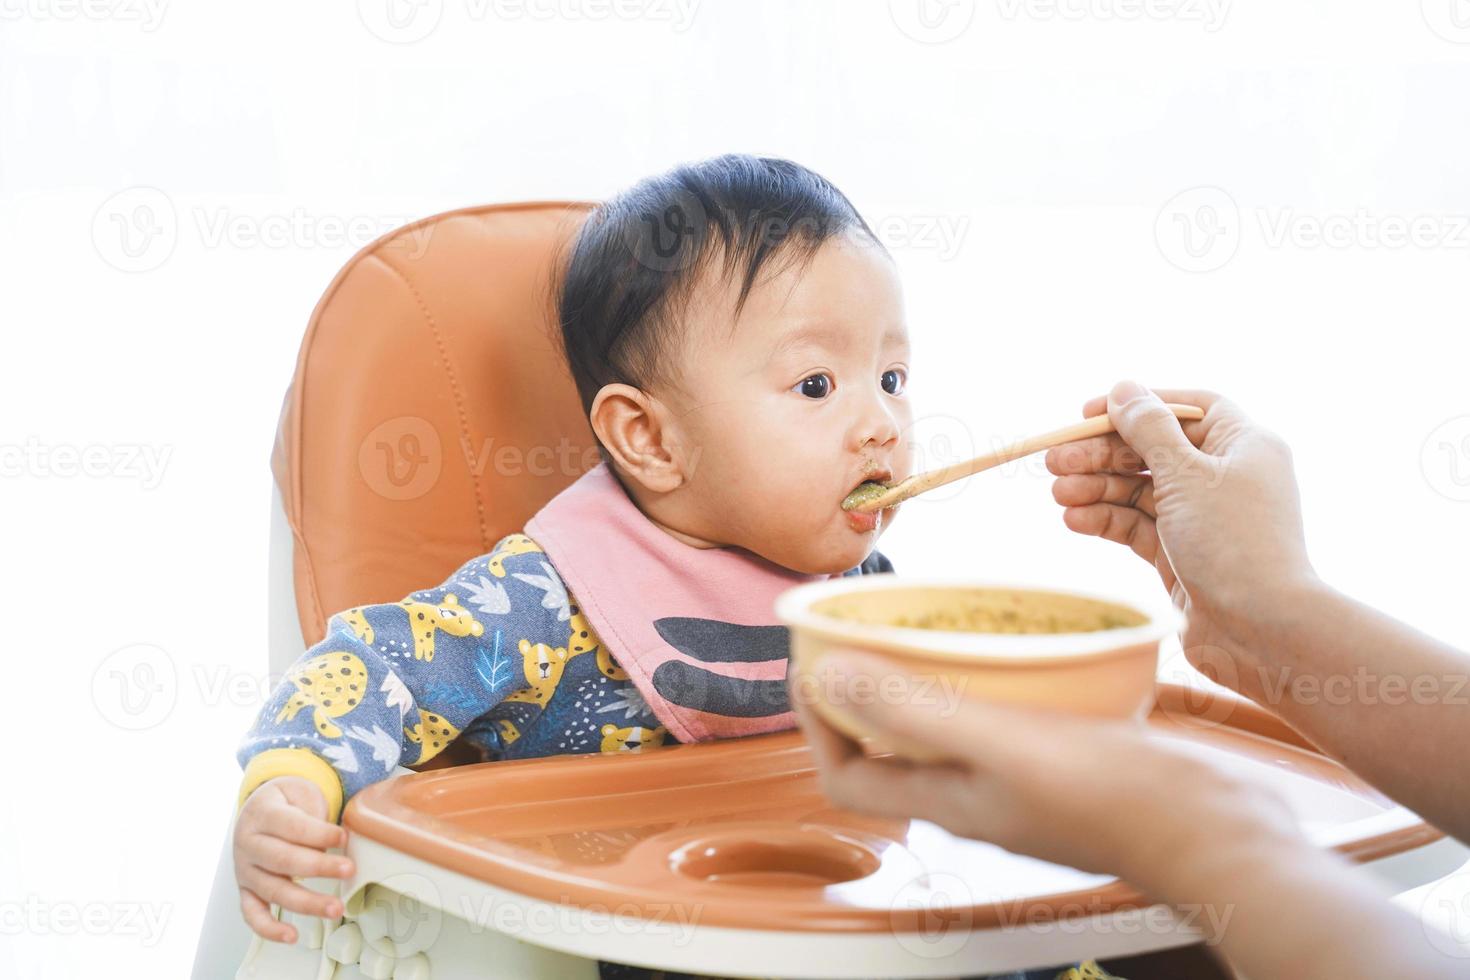 6 months old baby girl eating blend food on a high chair. photo